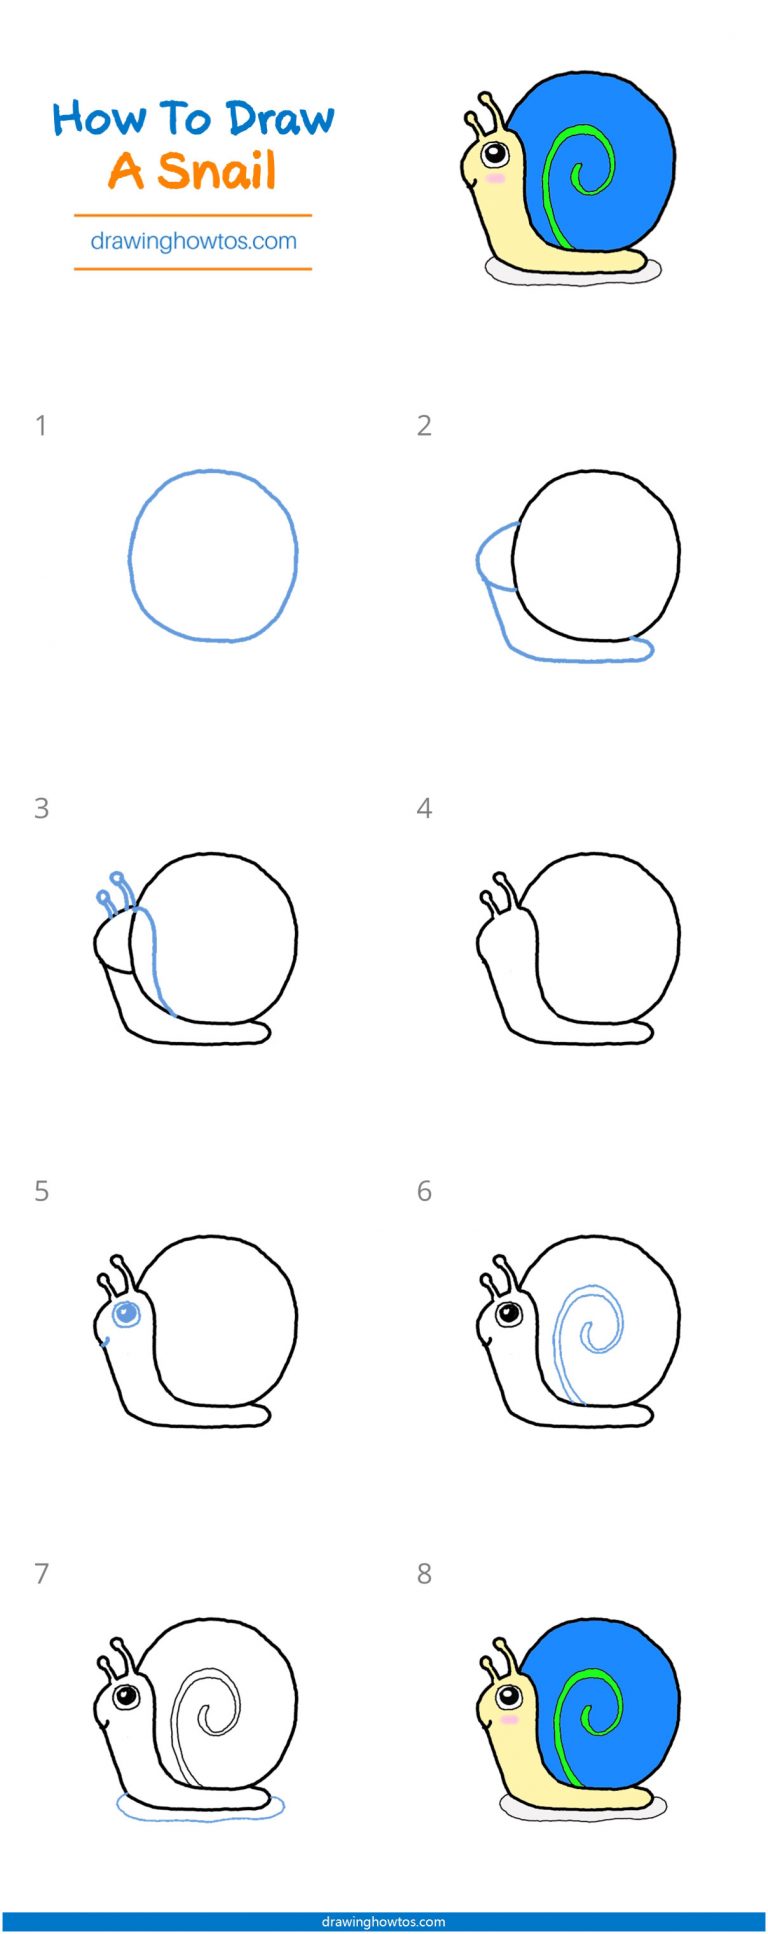 How to Draw a Snail Step by Step Easy Drawing Guides Drawing Howtos